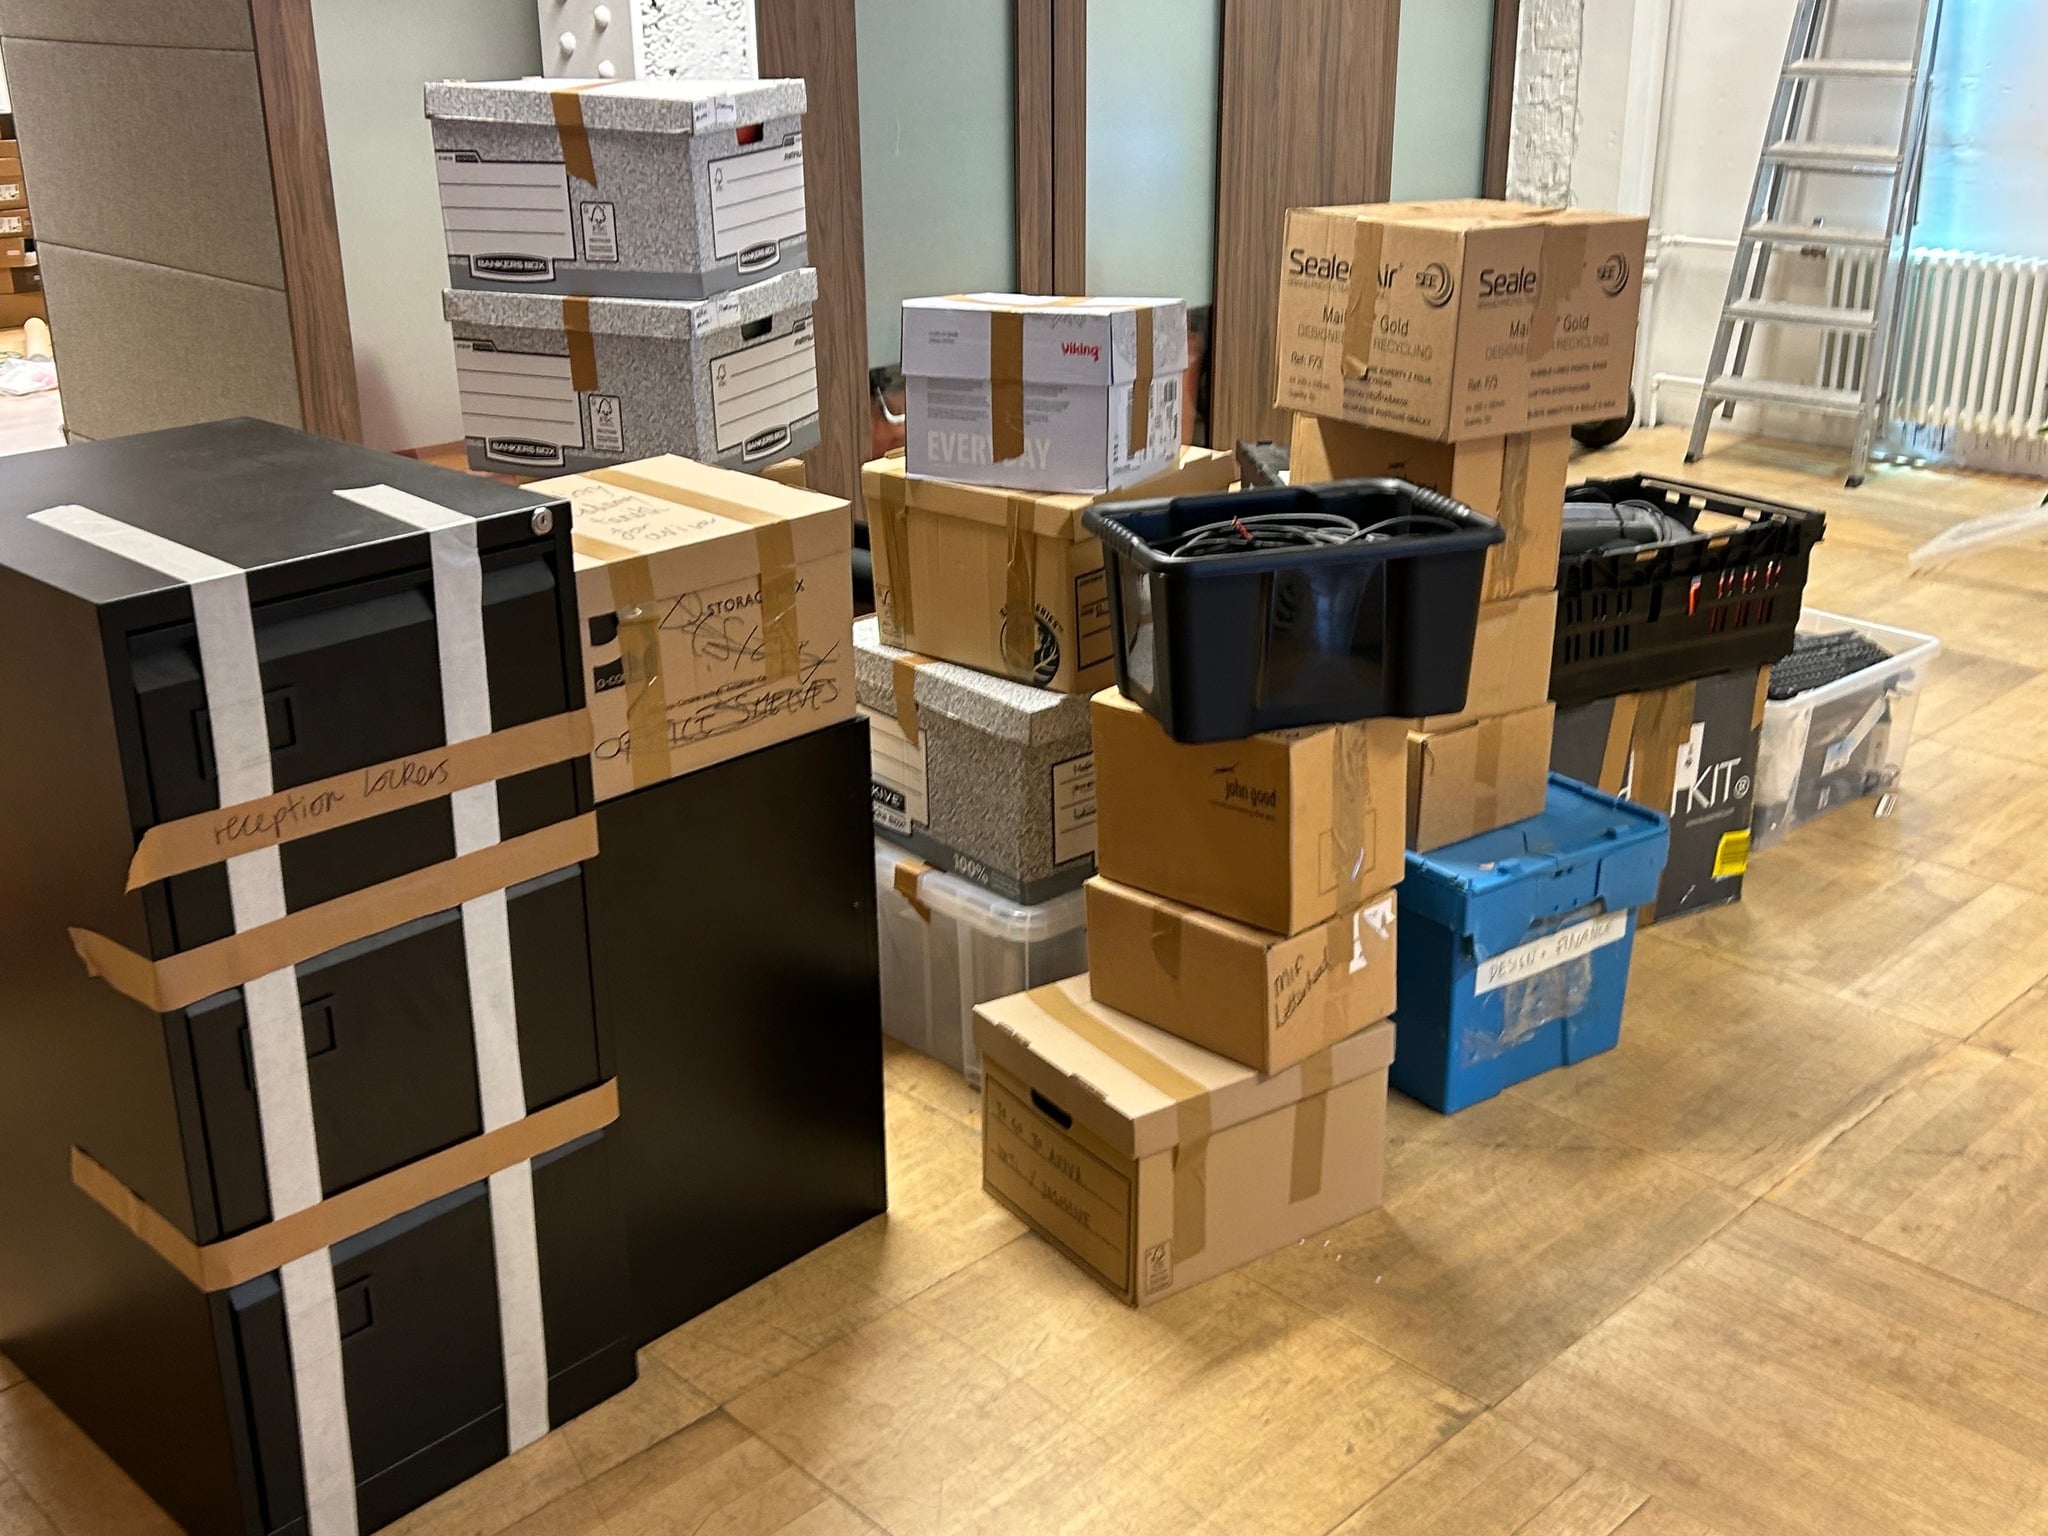 offers a full range of packing and removal services. We understand that your requirements may differ from other customers. That’s why we tailor our packing services to meet your individual needs.